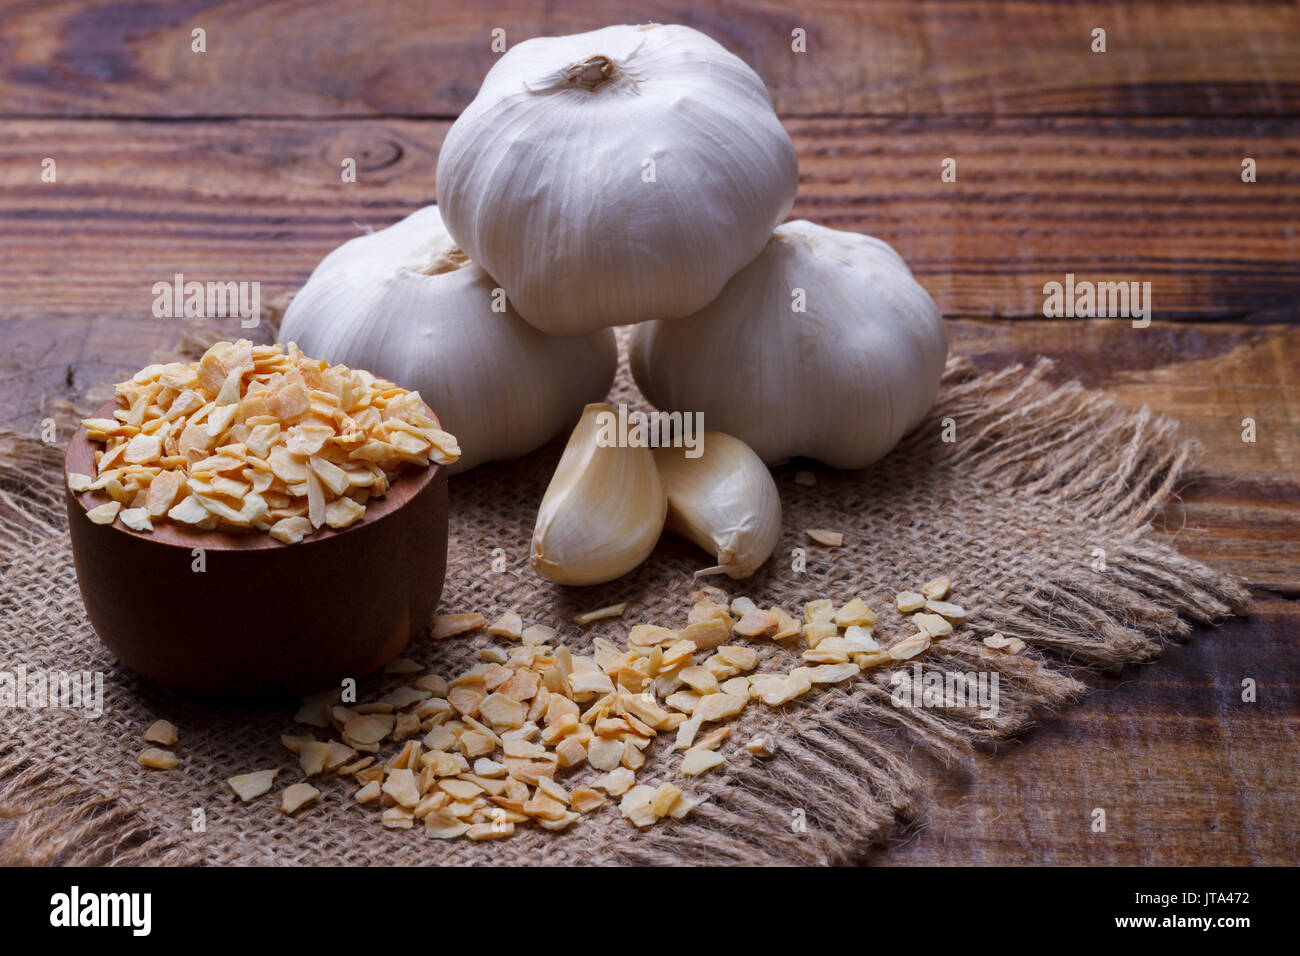 garlic cloves, bulb and flakes on old wooden board Stock Photo